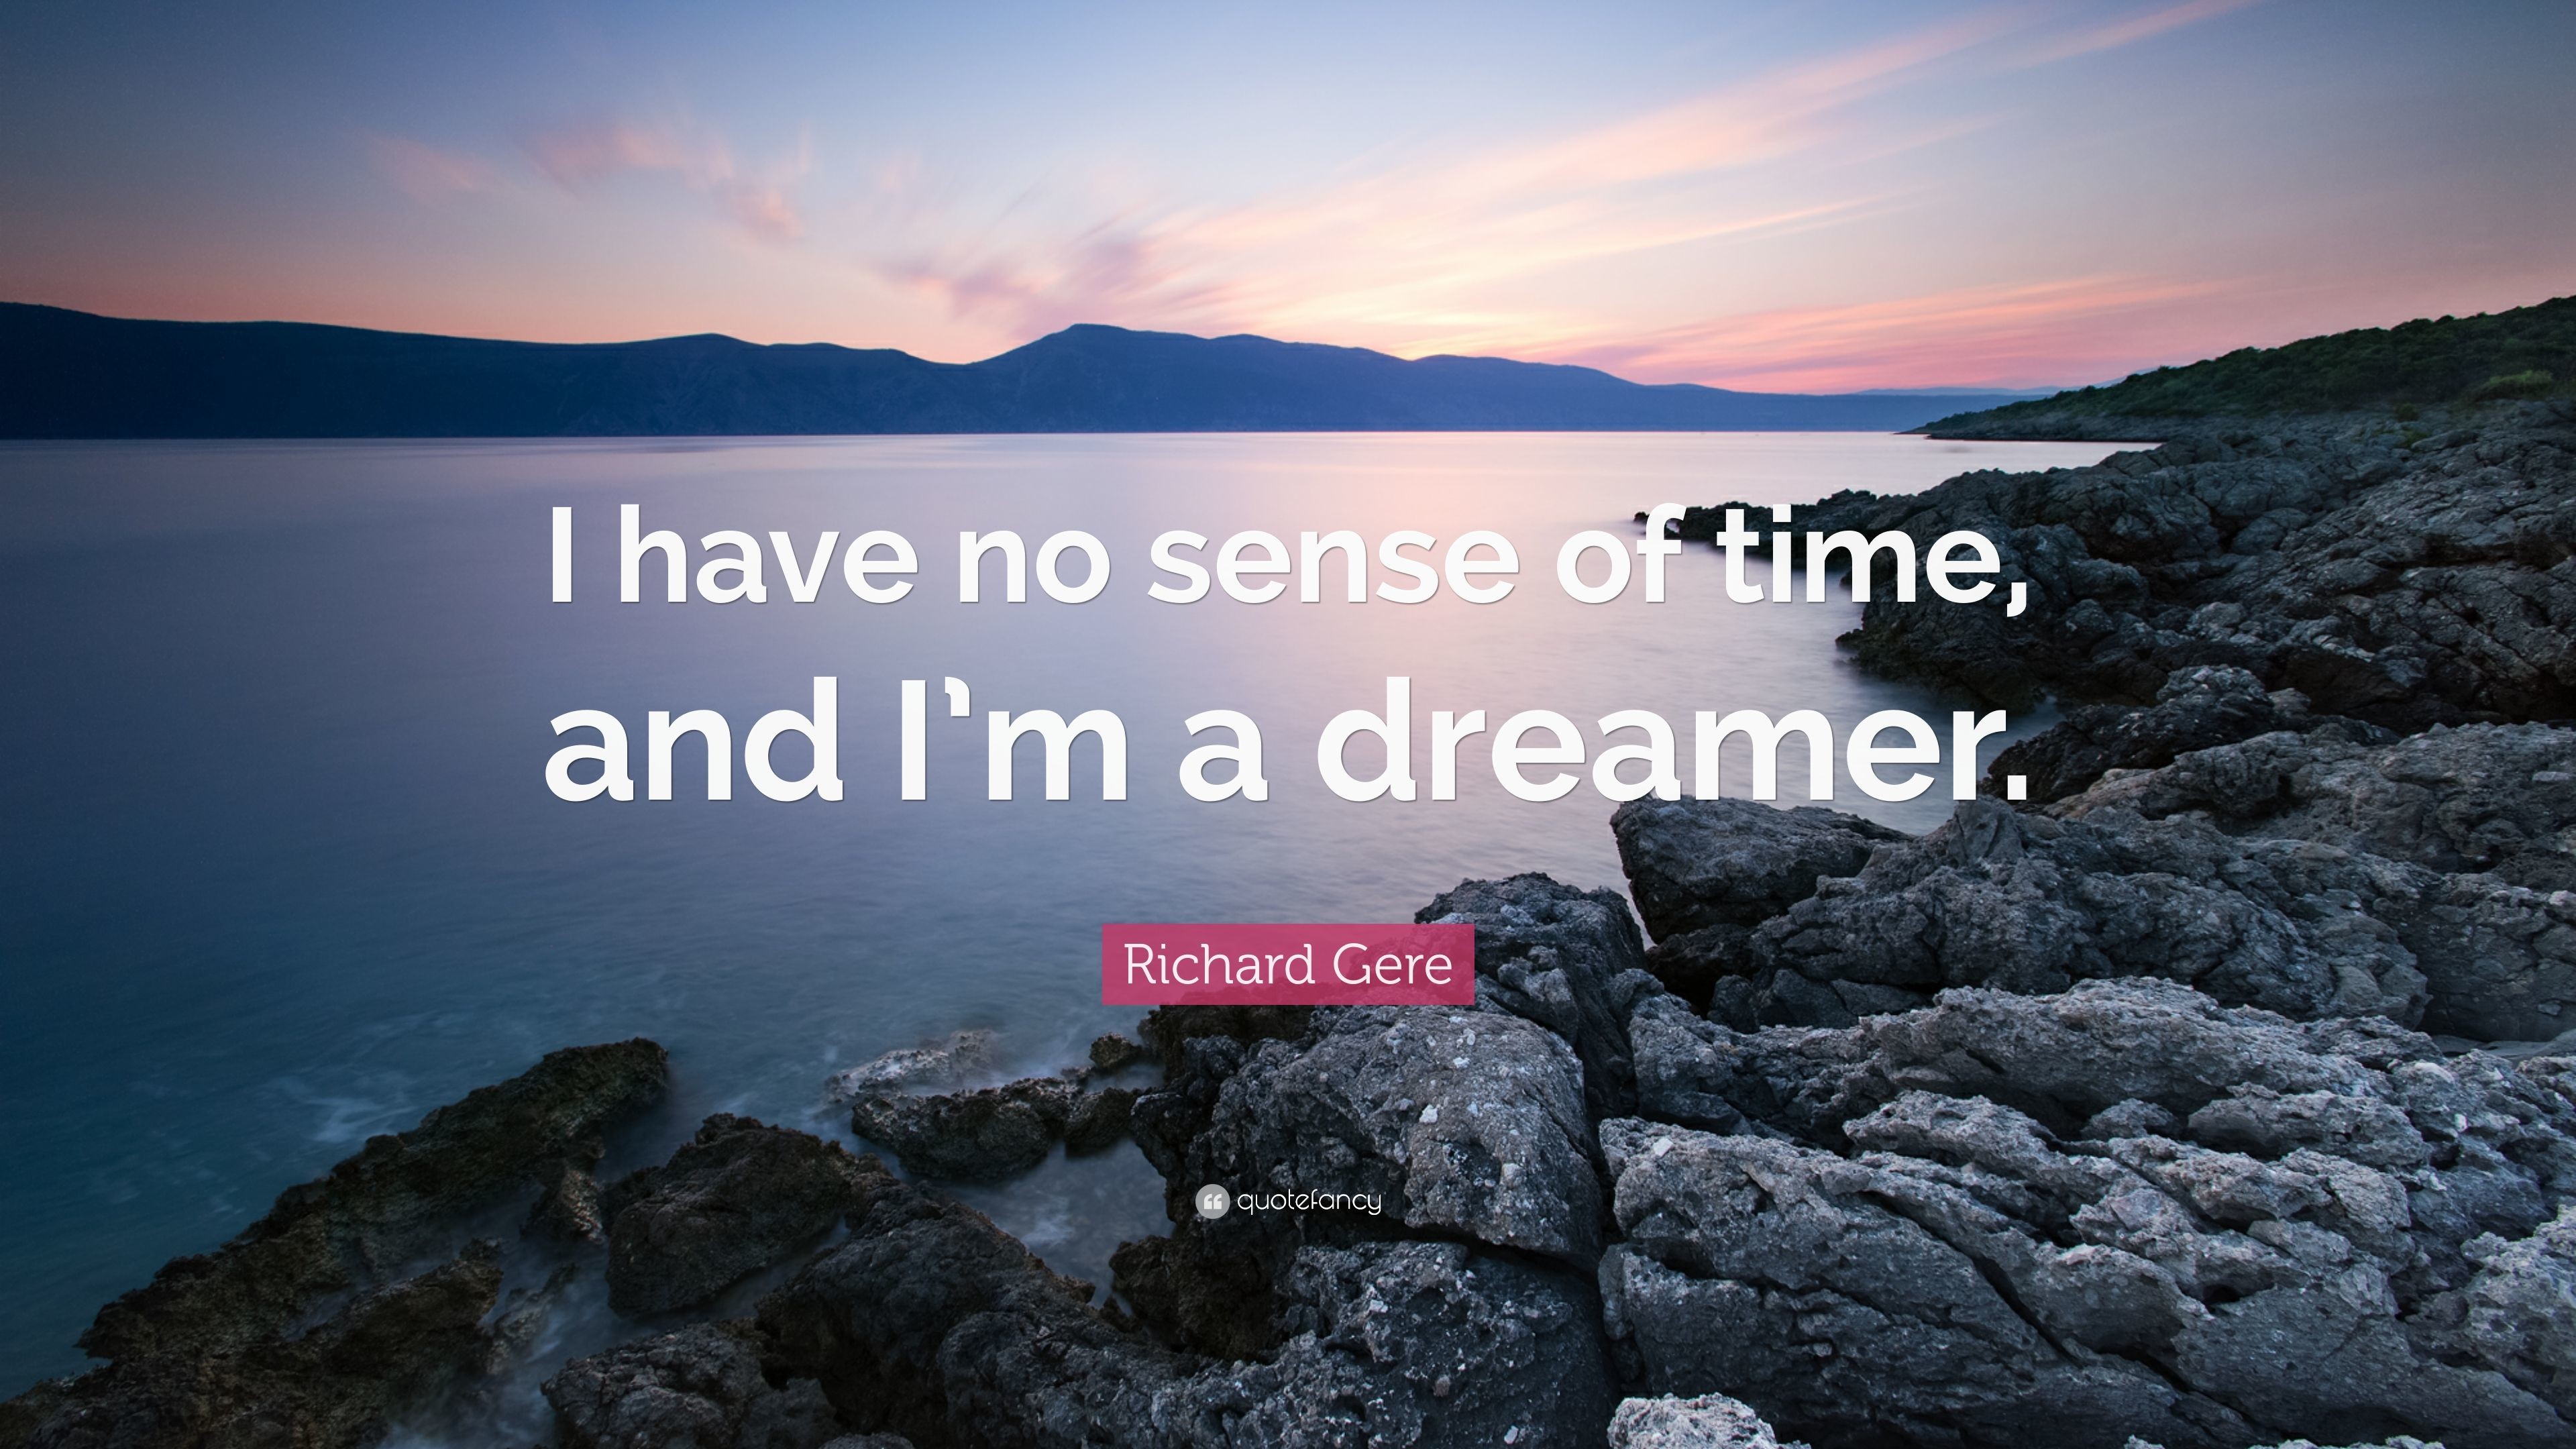 3840x2160 Richard Gere Quote: “I have no sense of time, and I'm